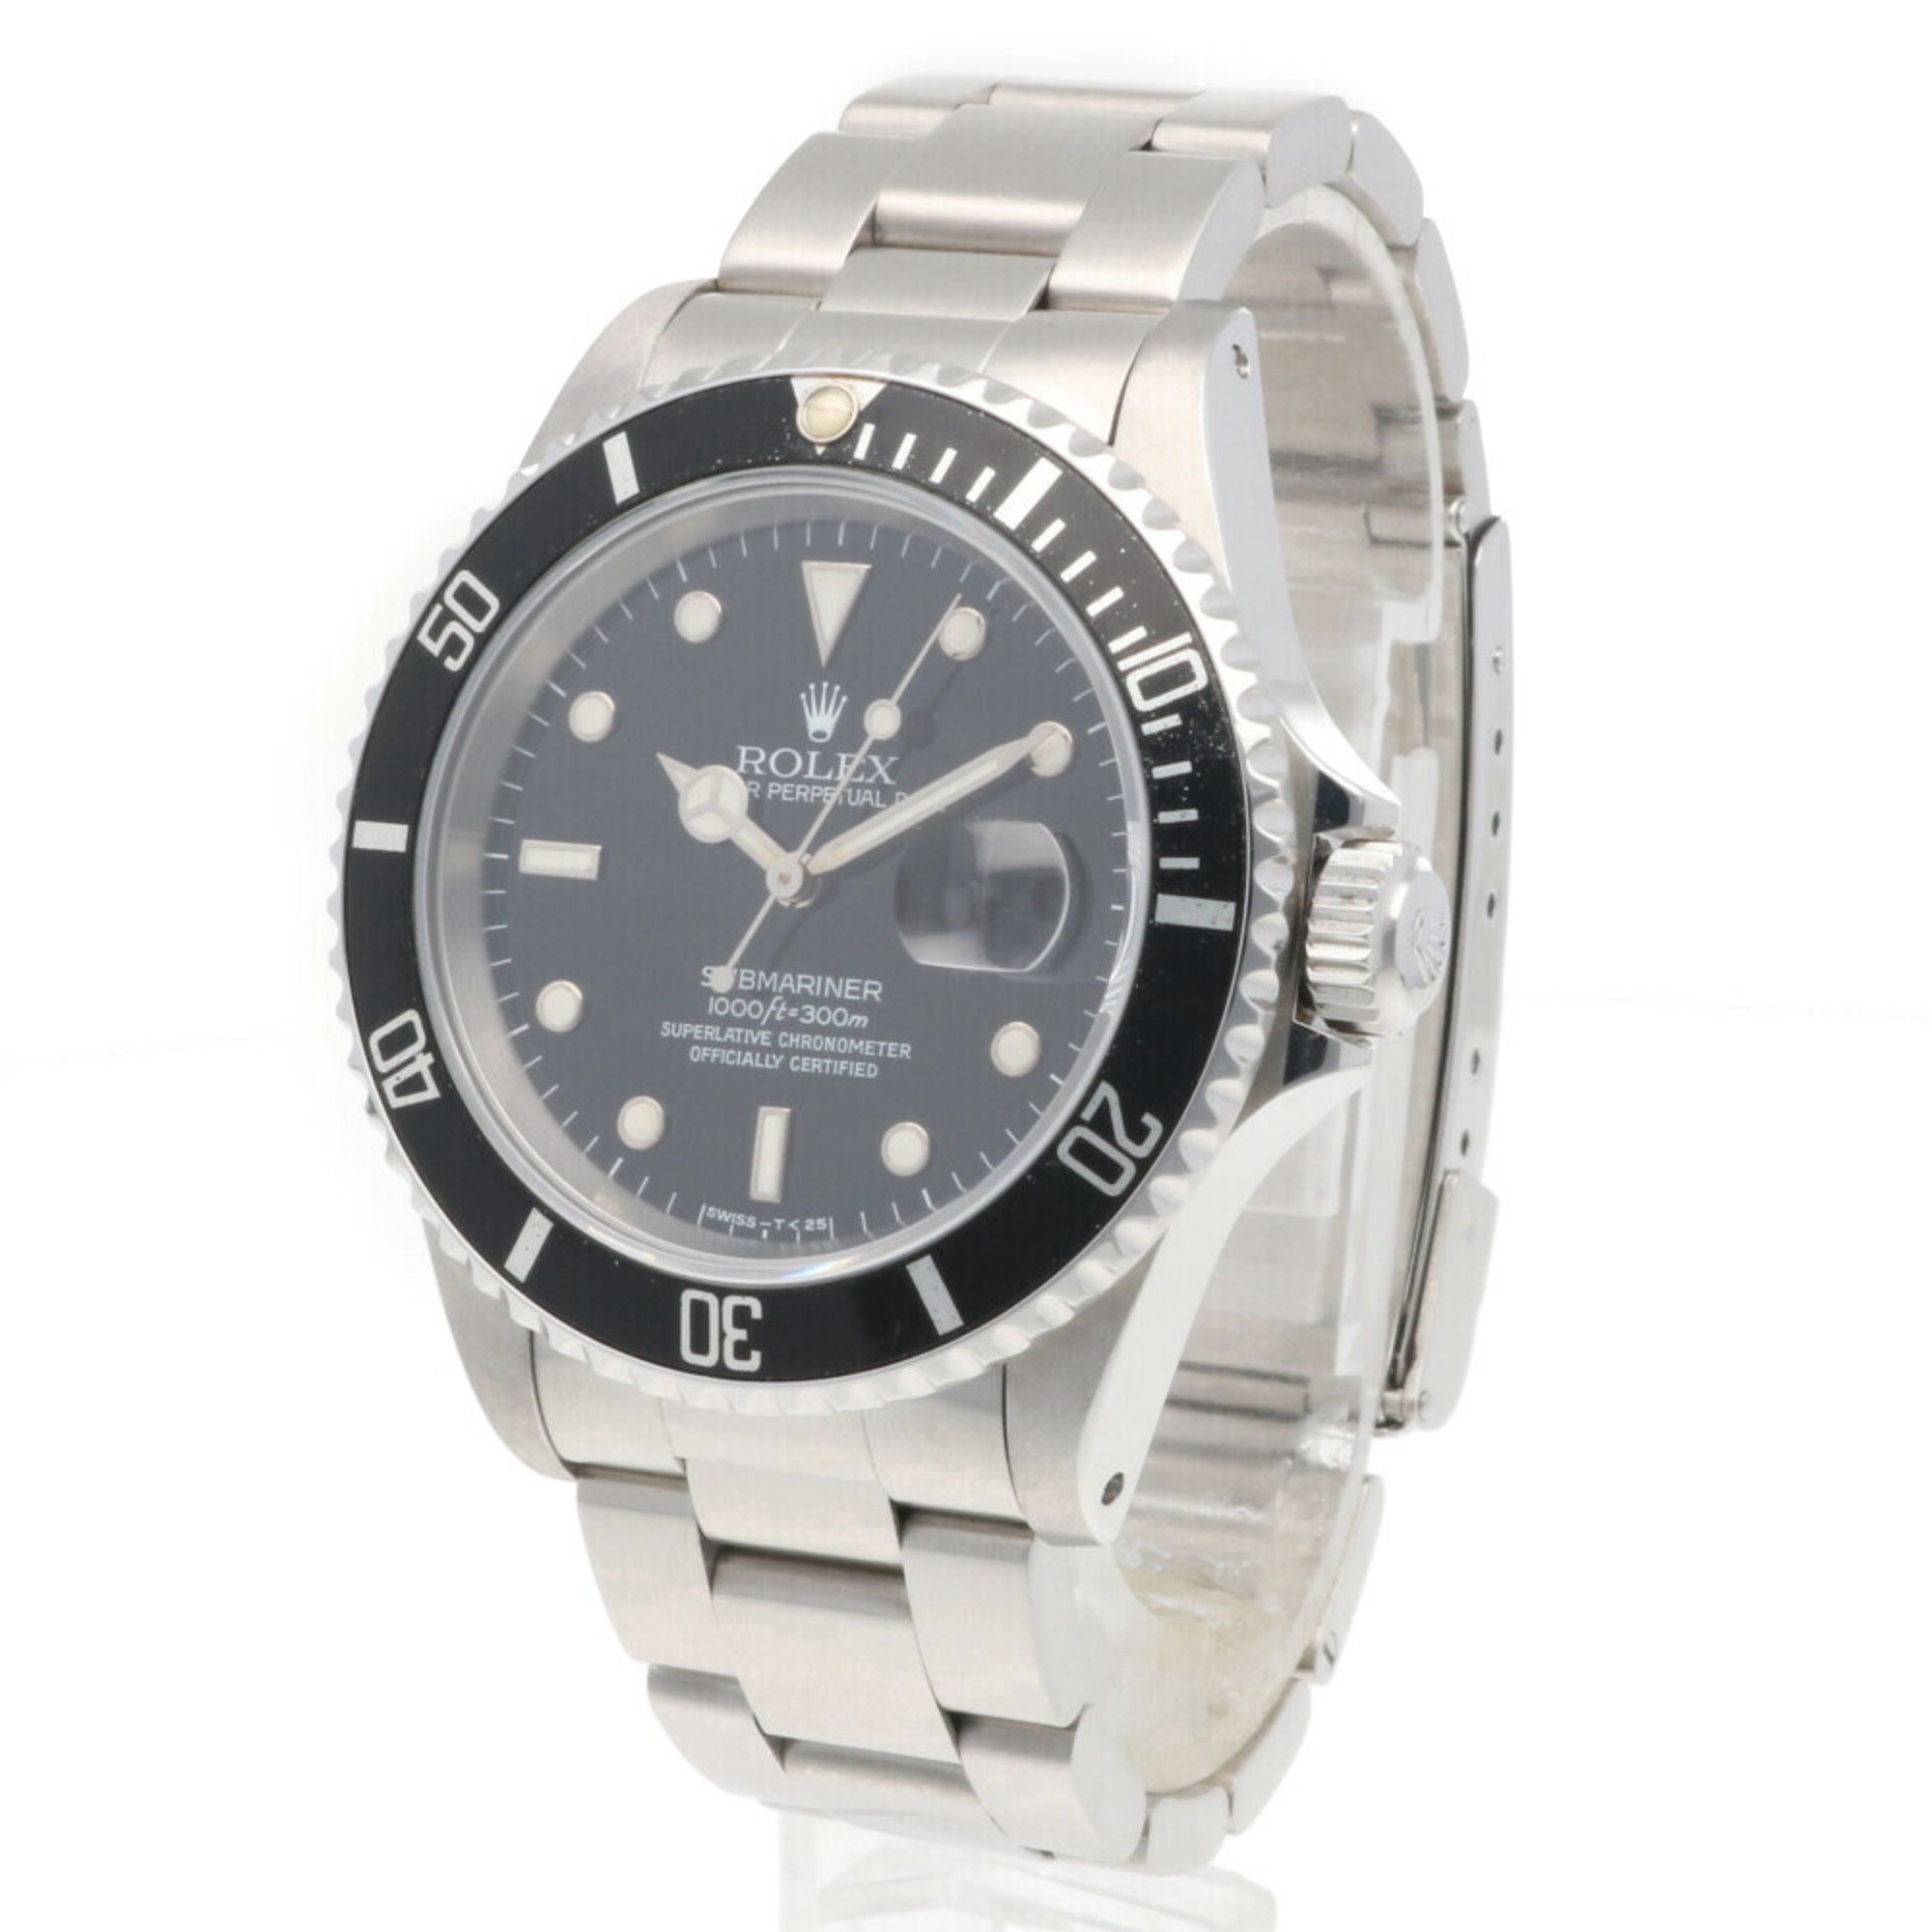 Rolex Submariner Oyster Perpetual Watch Stainless Steel 16610 Men's